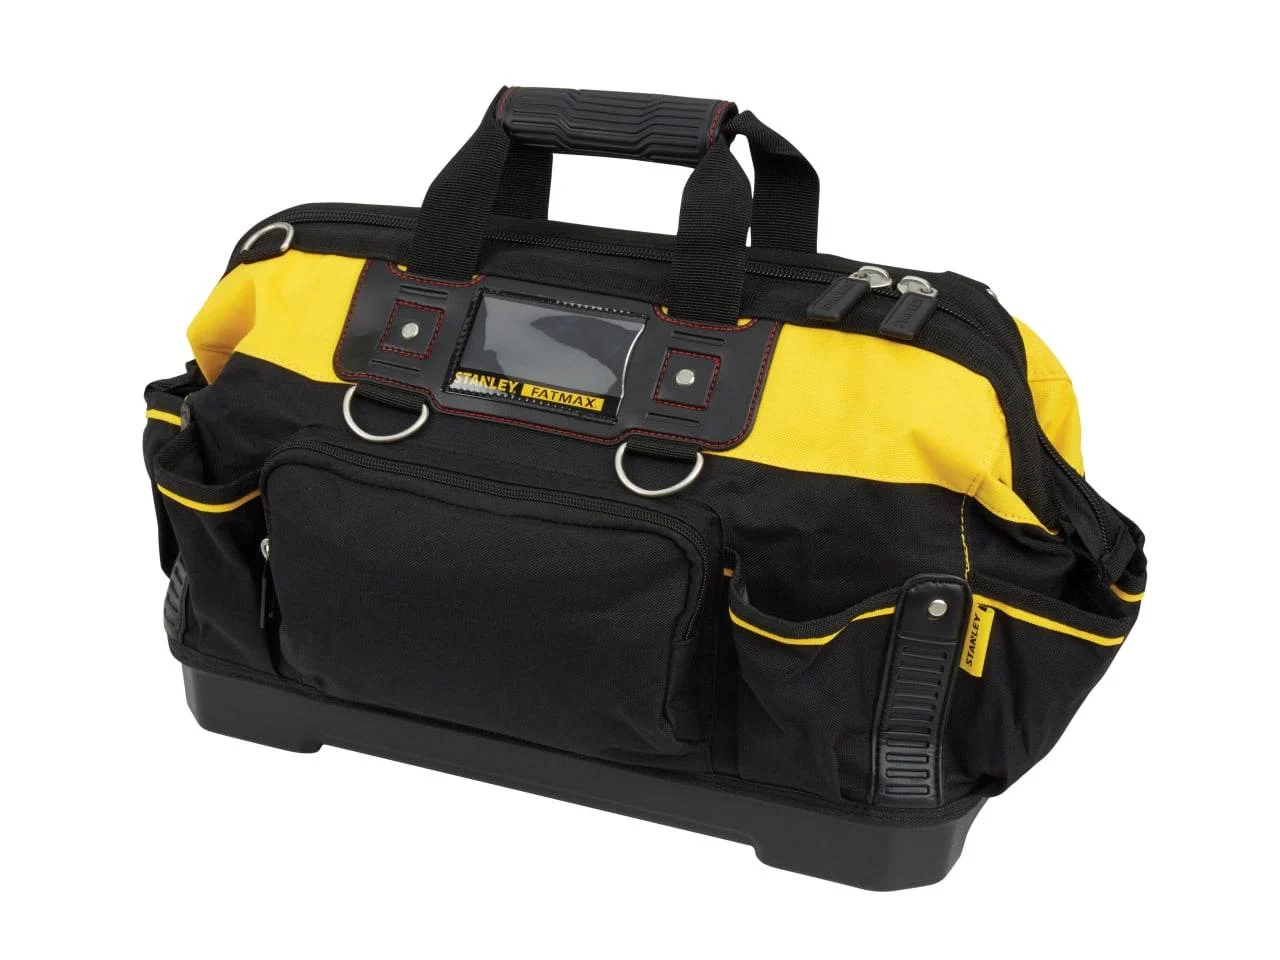 The @stanleytoolsuk STA195611 Fatmax Tool Technicians Backpack is